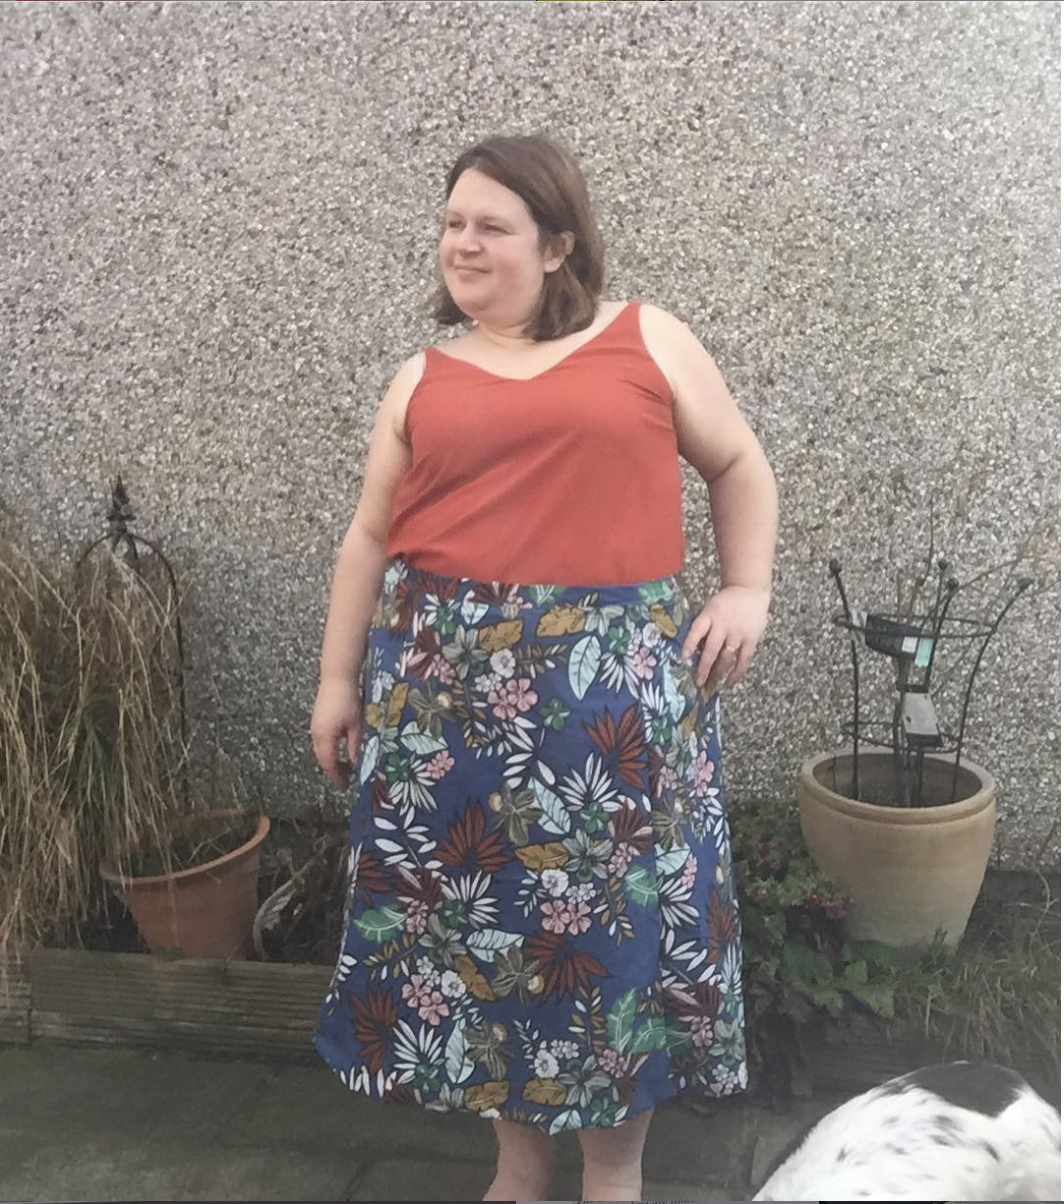 The Scroop Fantail Skirt by @sewdoitemma